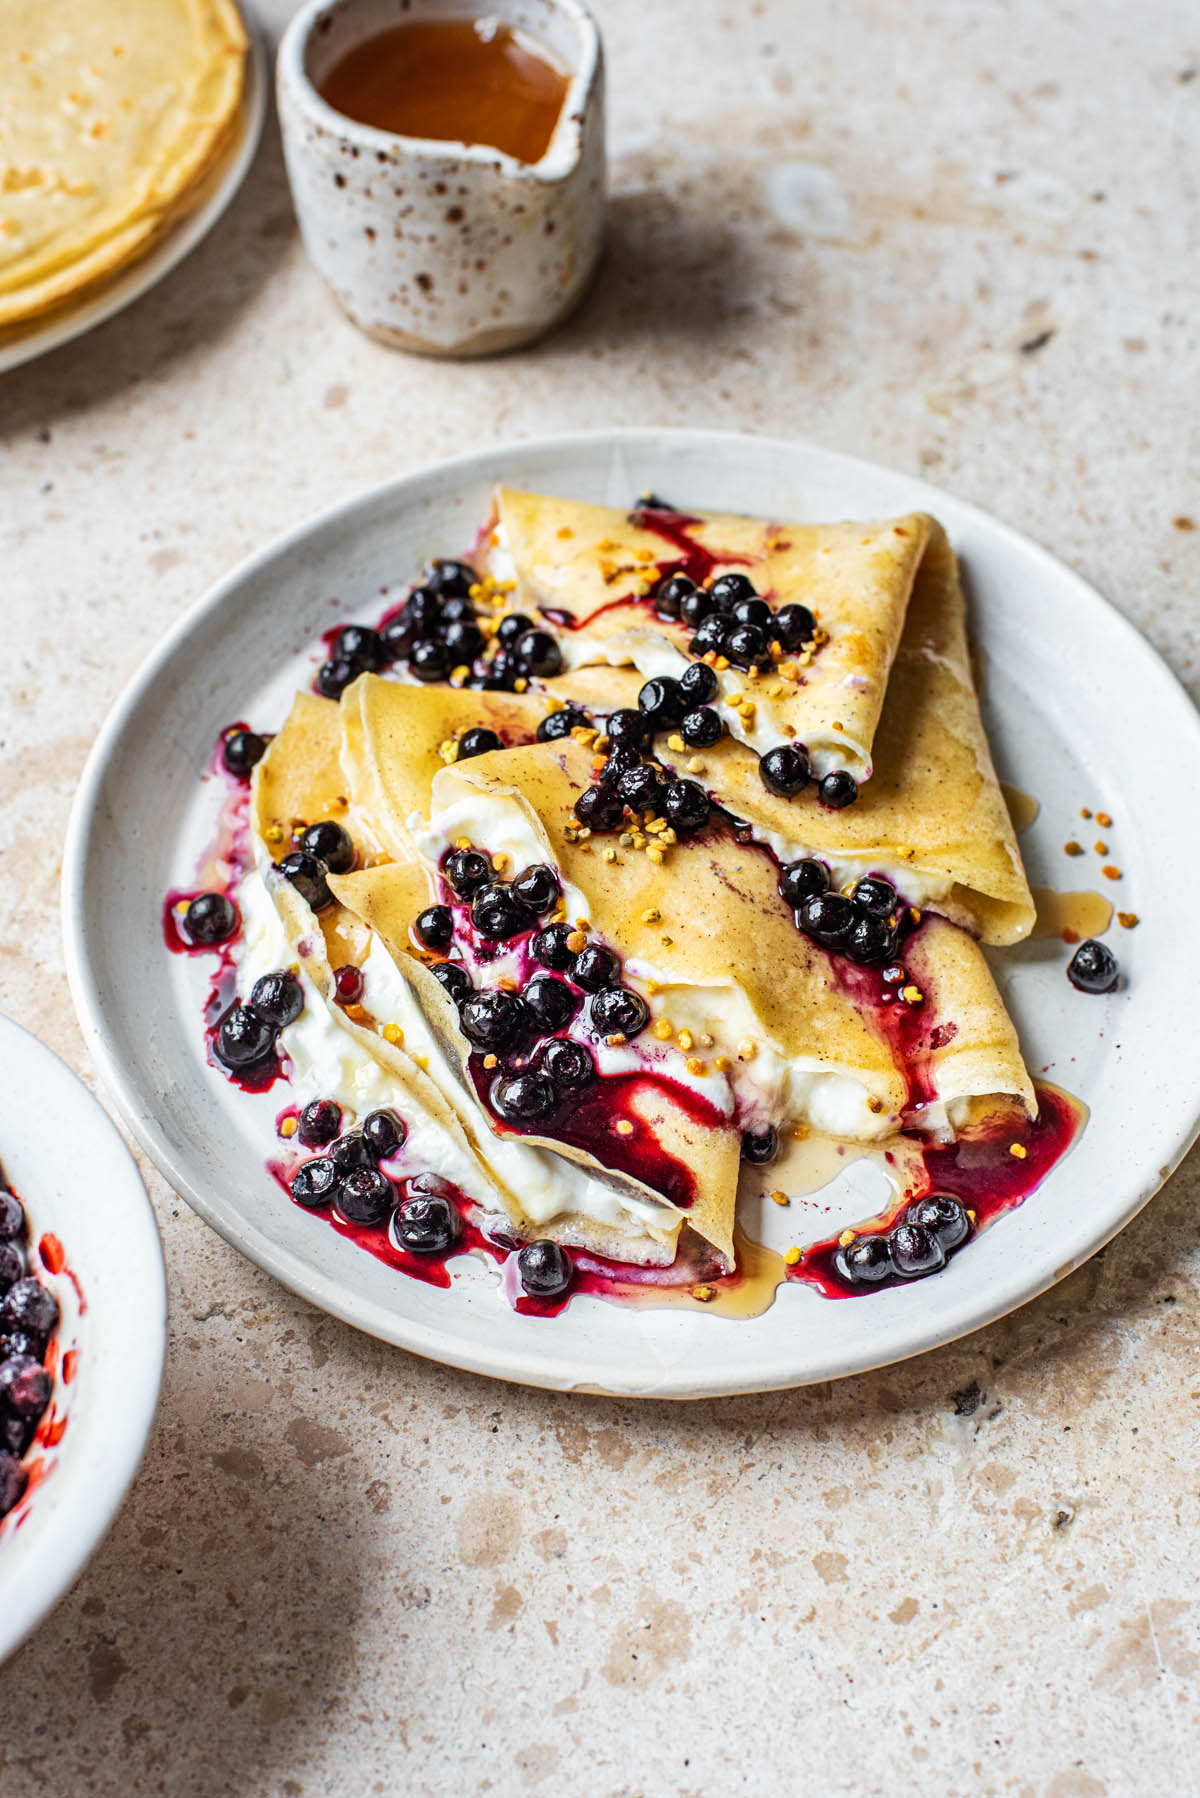 Folded crepes with yogurt and berries.